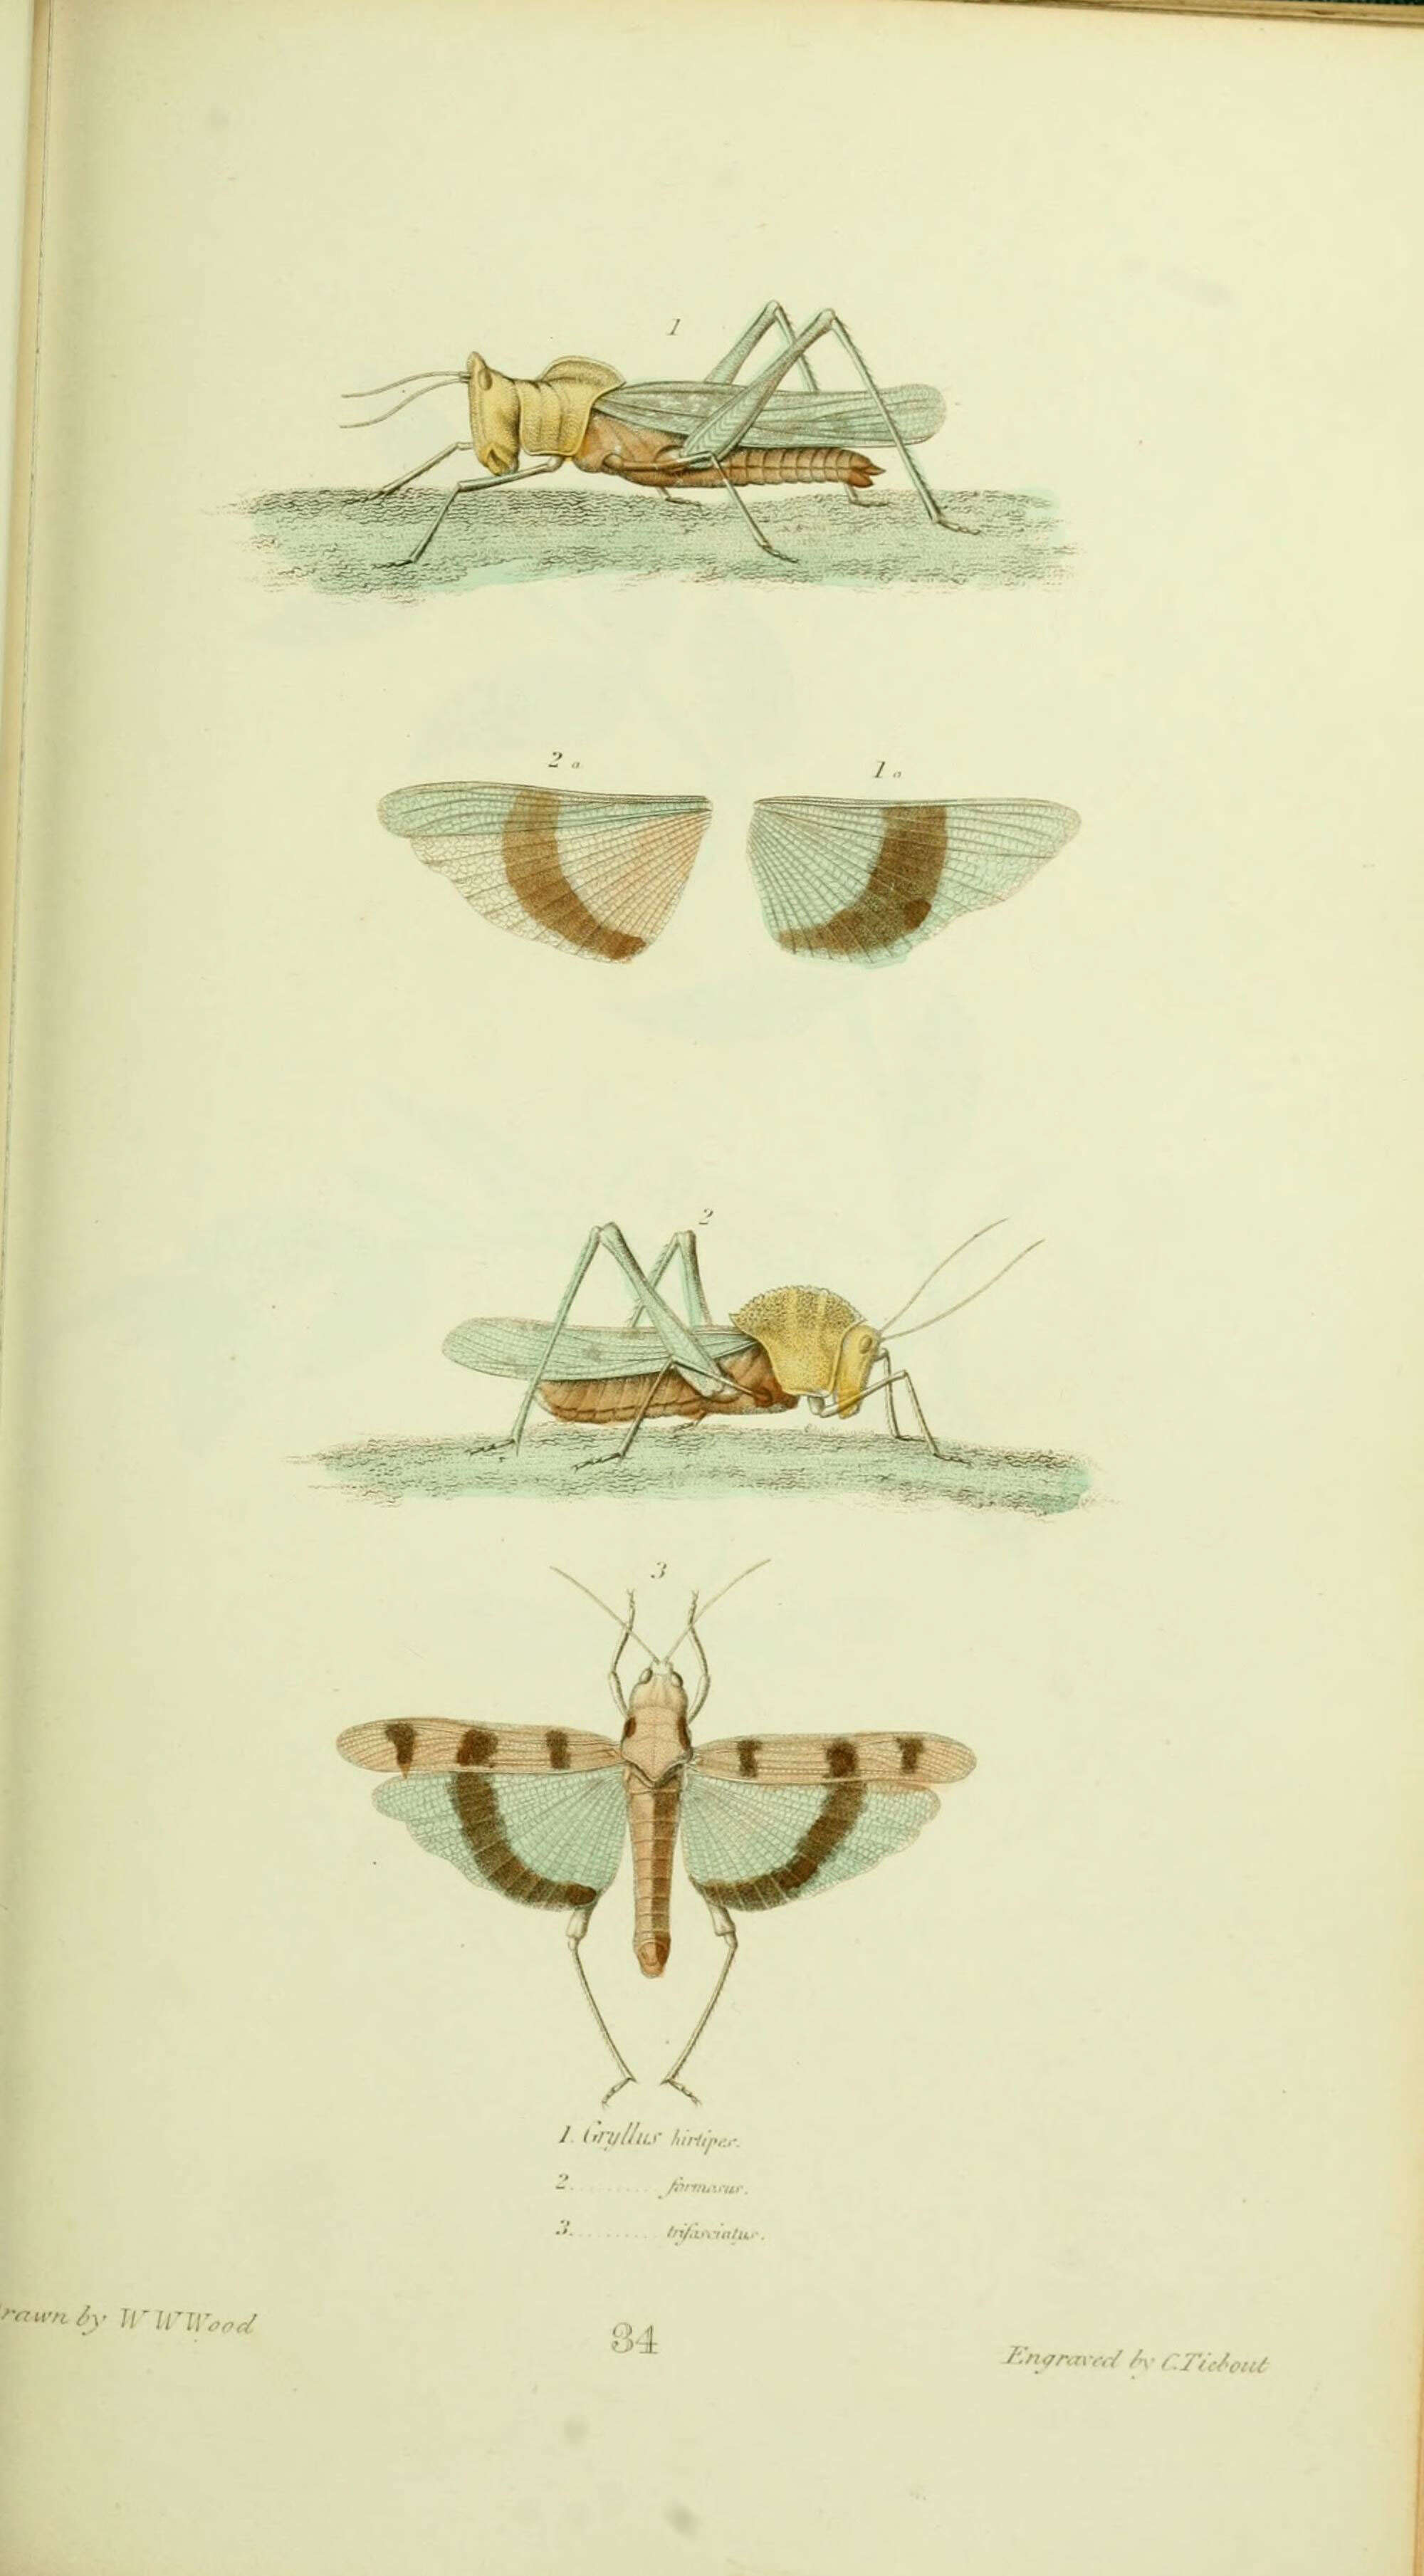 Image of Point-head Grasshoppers